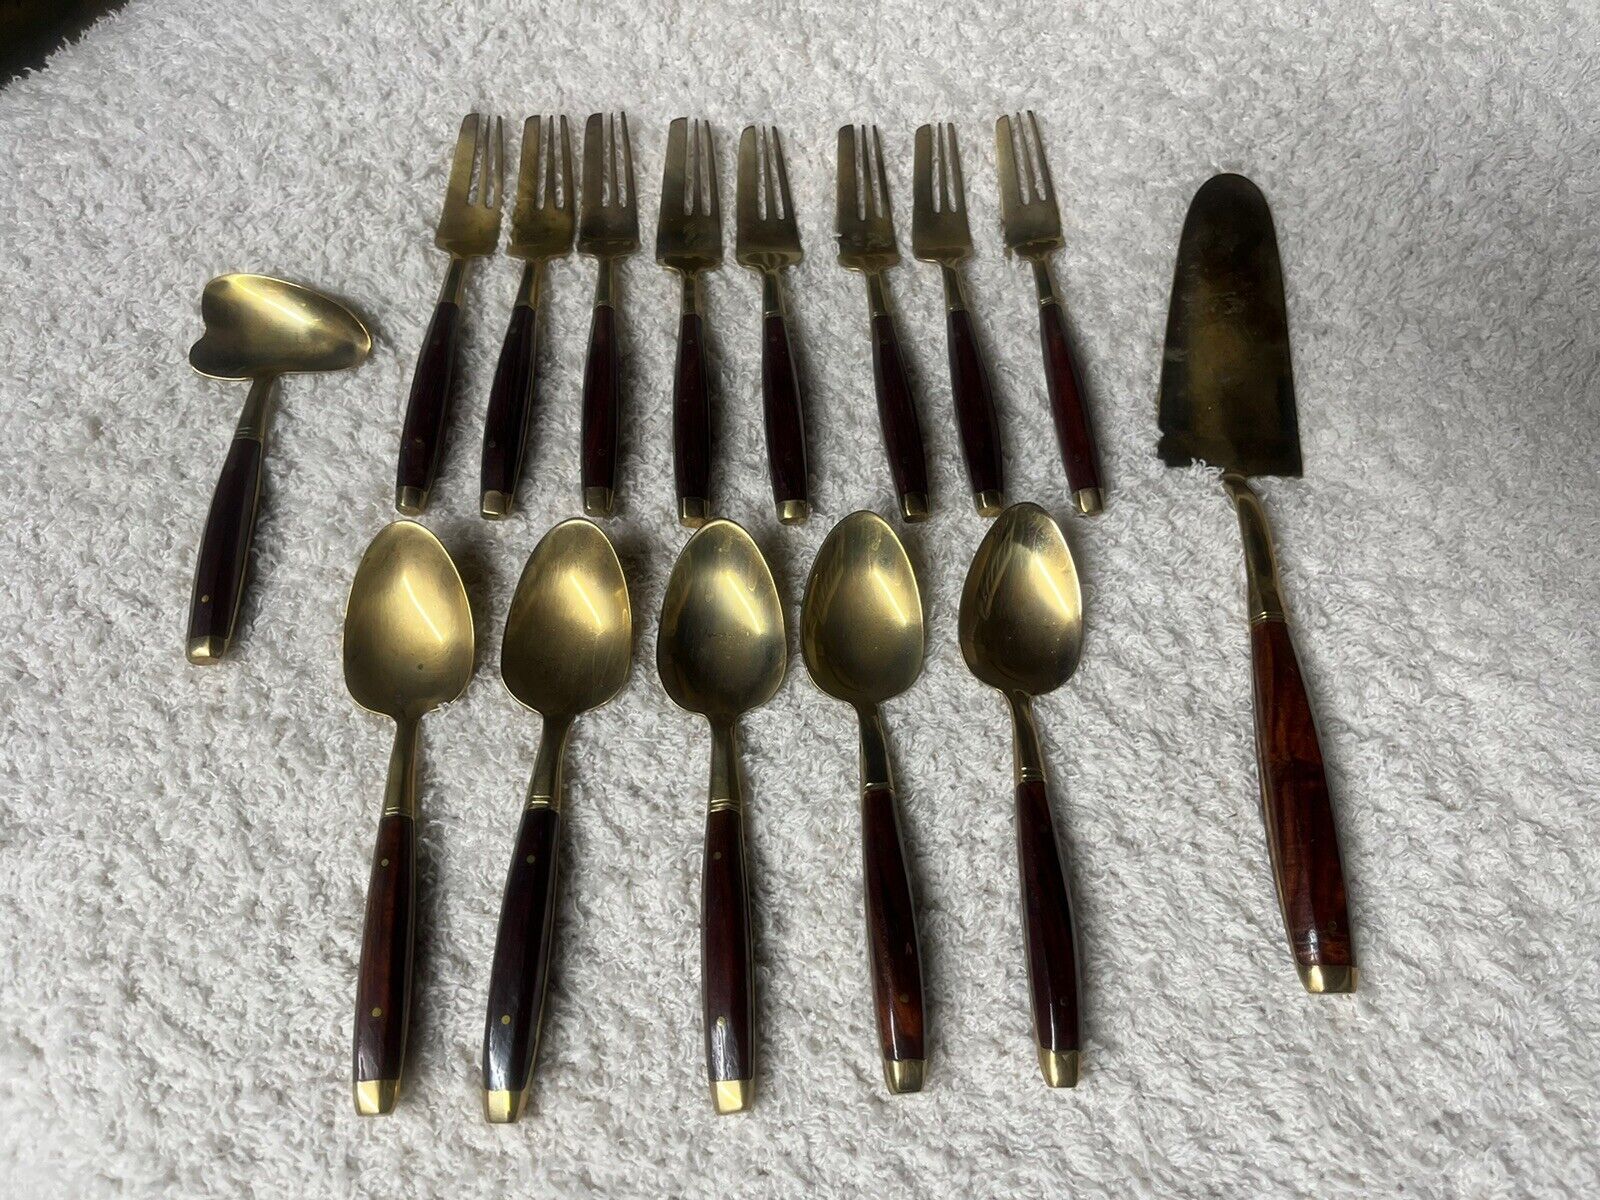 VTG MID CENTURY MODERN THAI BRASS And Rosewood FLATWARE SERVING SET Of 15 Pieces